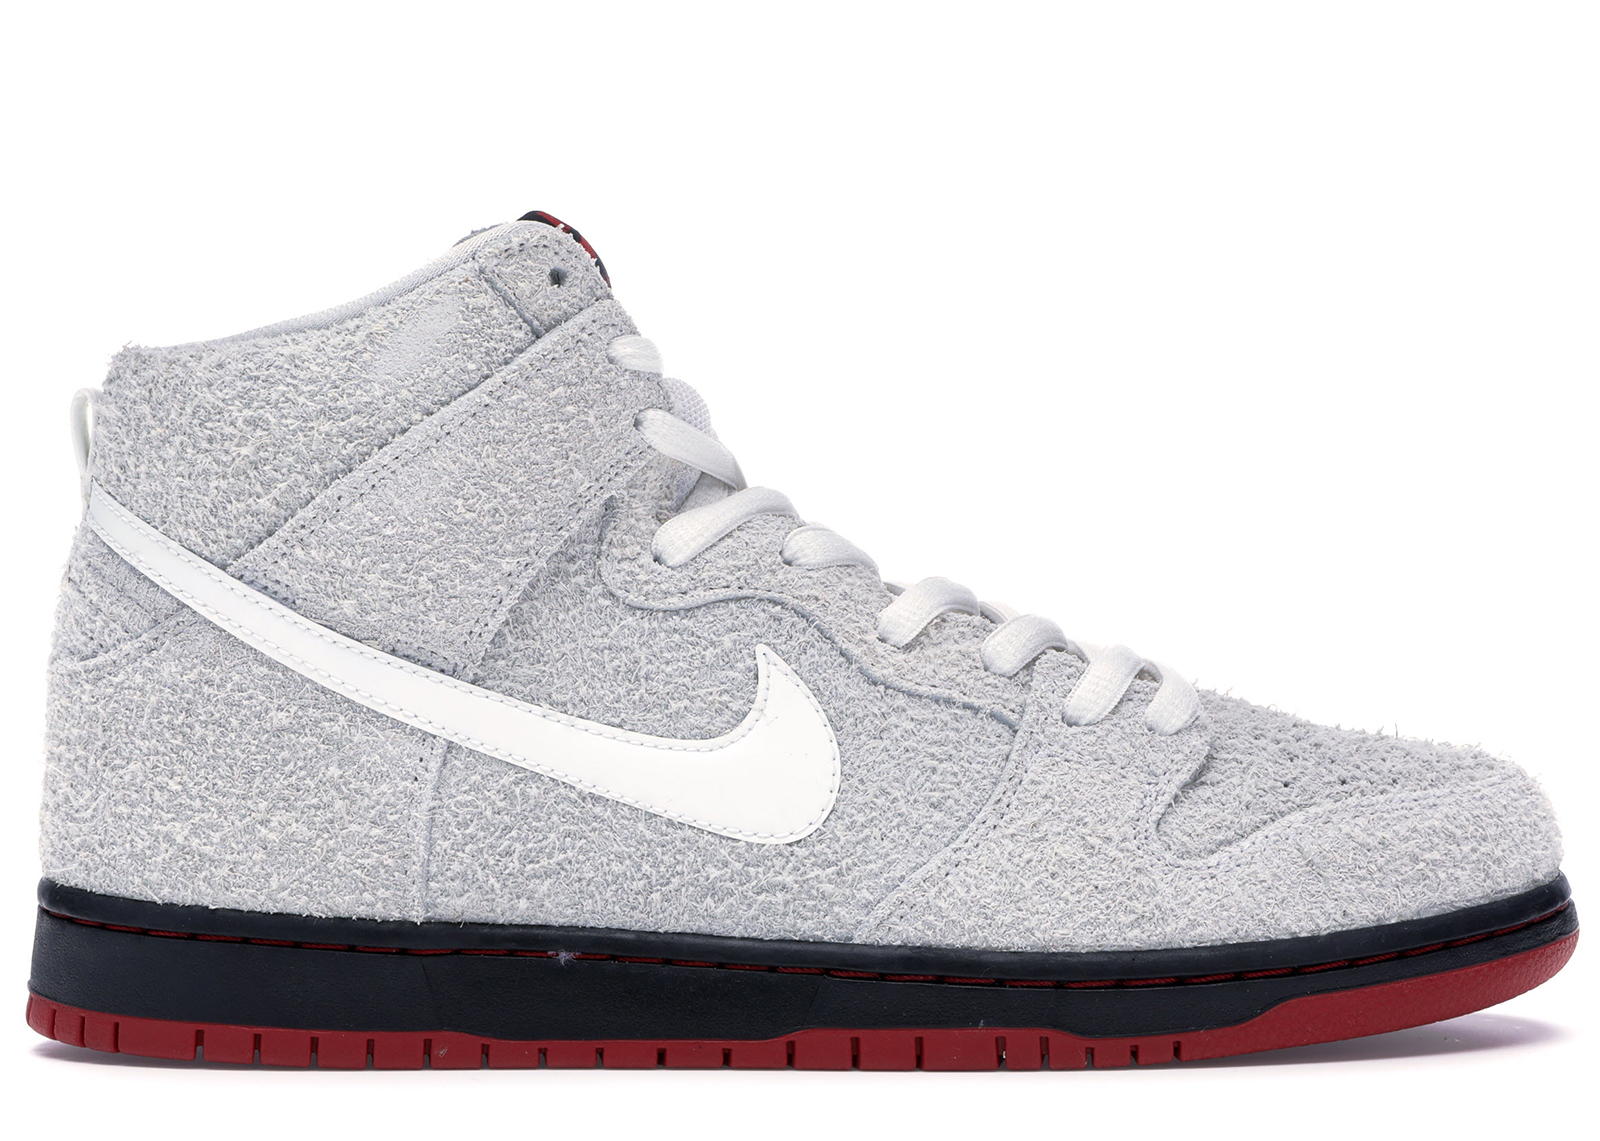 nike sb wolf in sheep's clothing deluxe